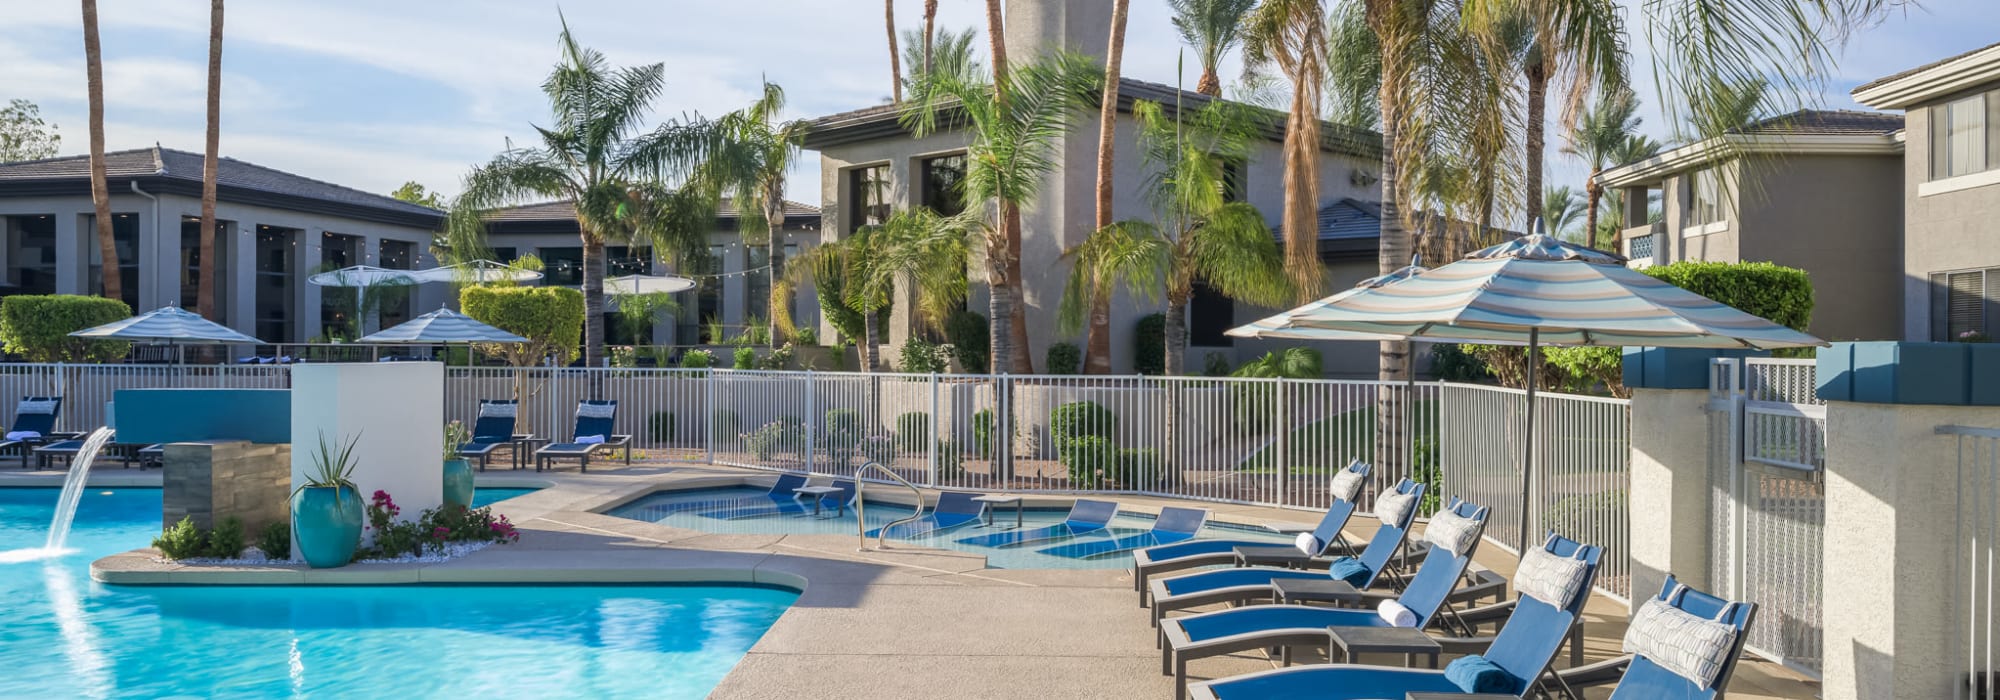 Resort style swimming pool that has lounge chairs all around it for residents and friends to use at Elite North Scottsdale in Scottsdale, Arizona